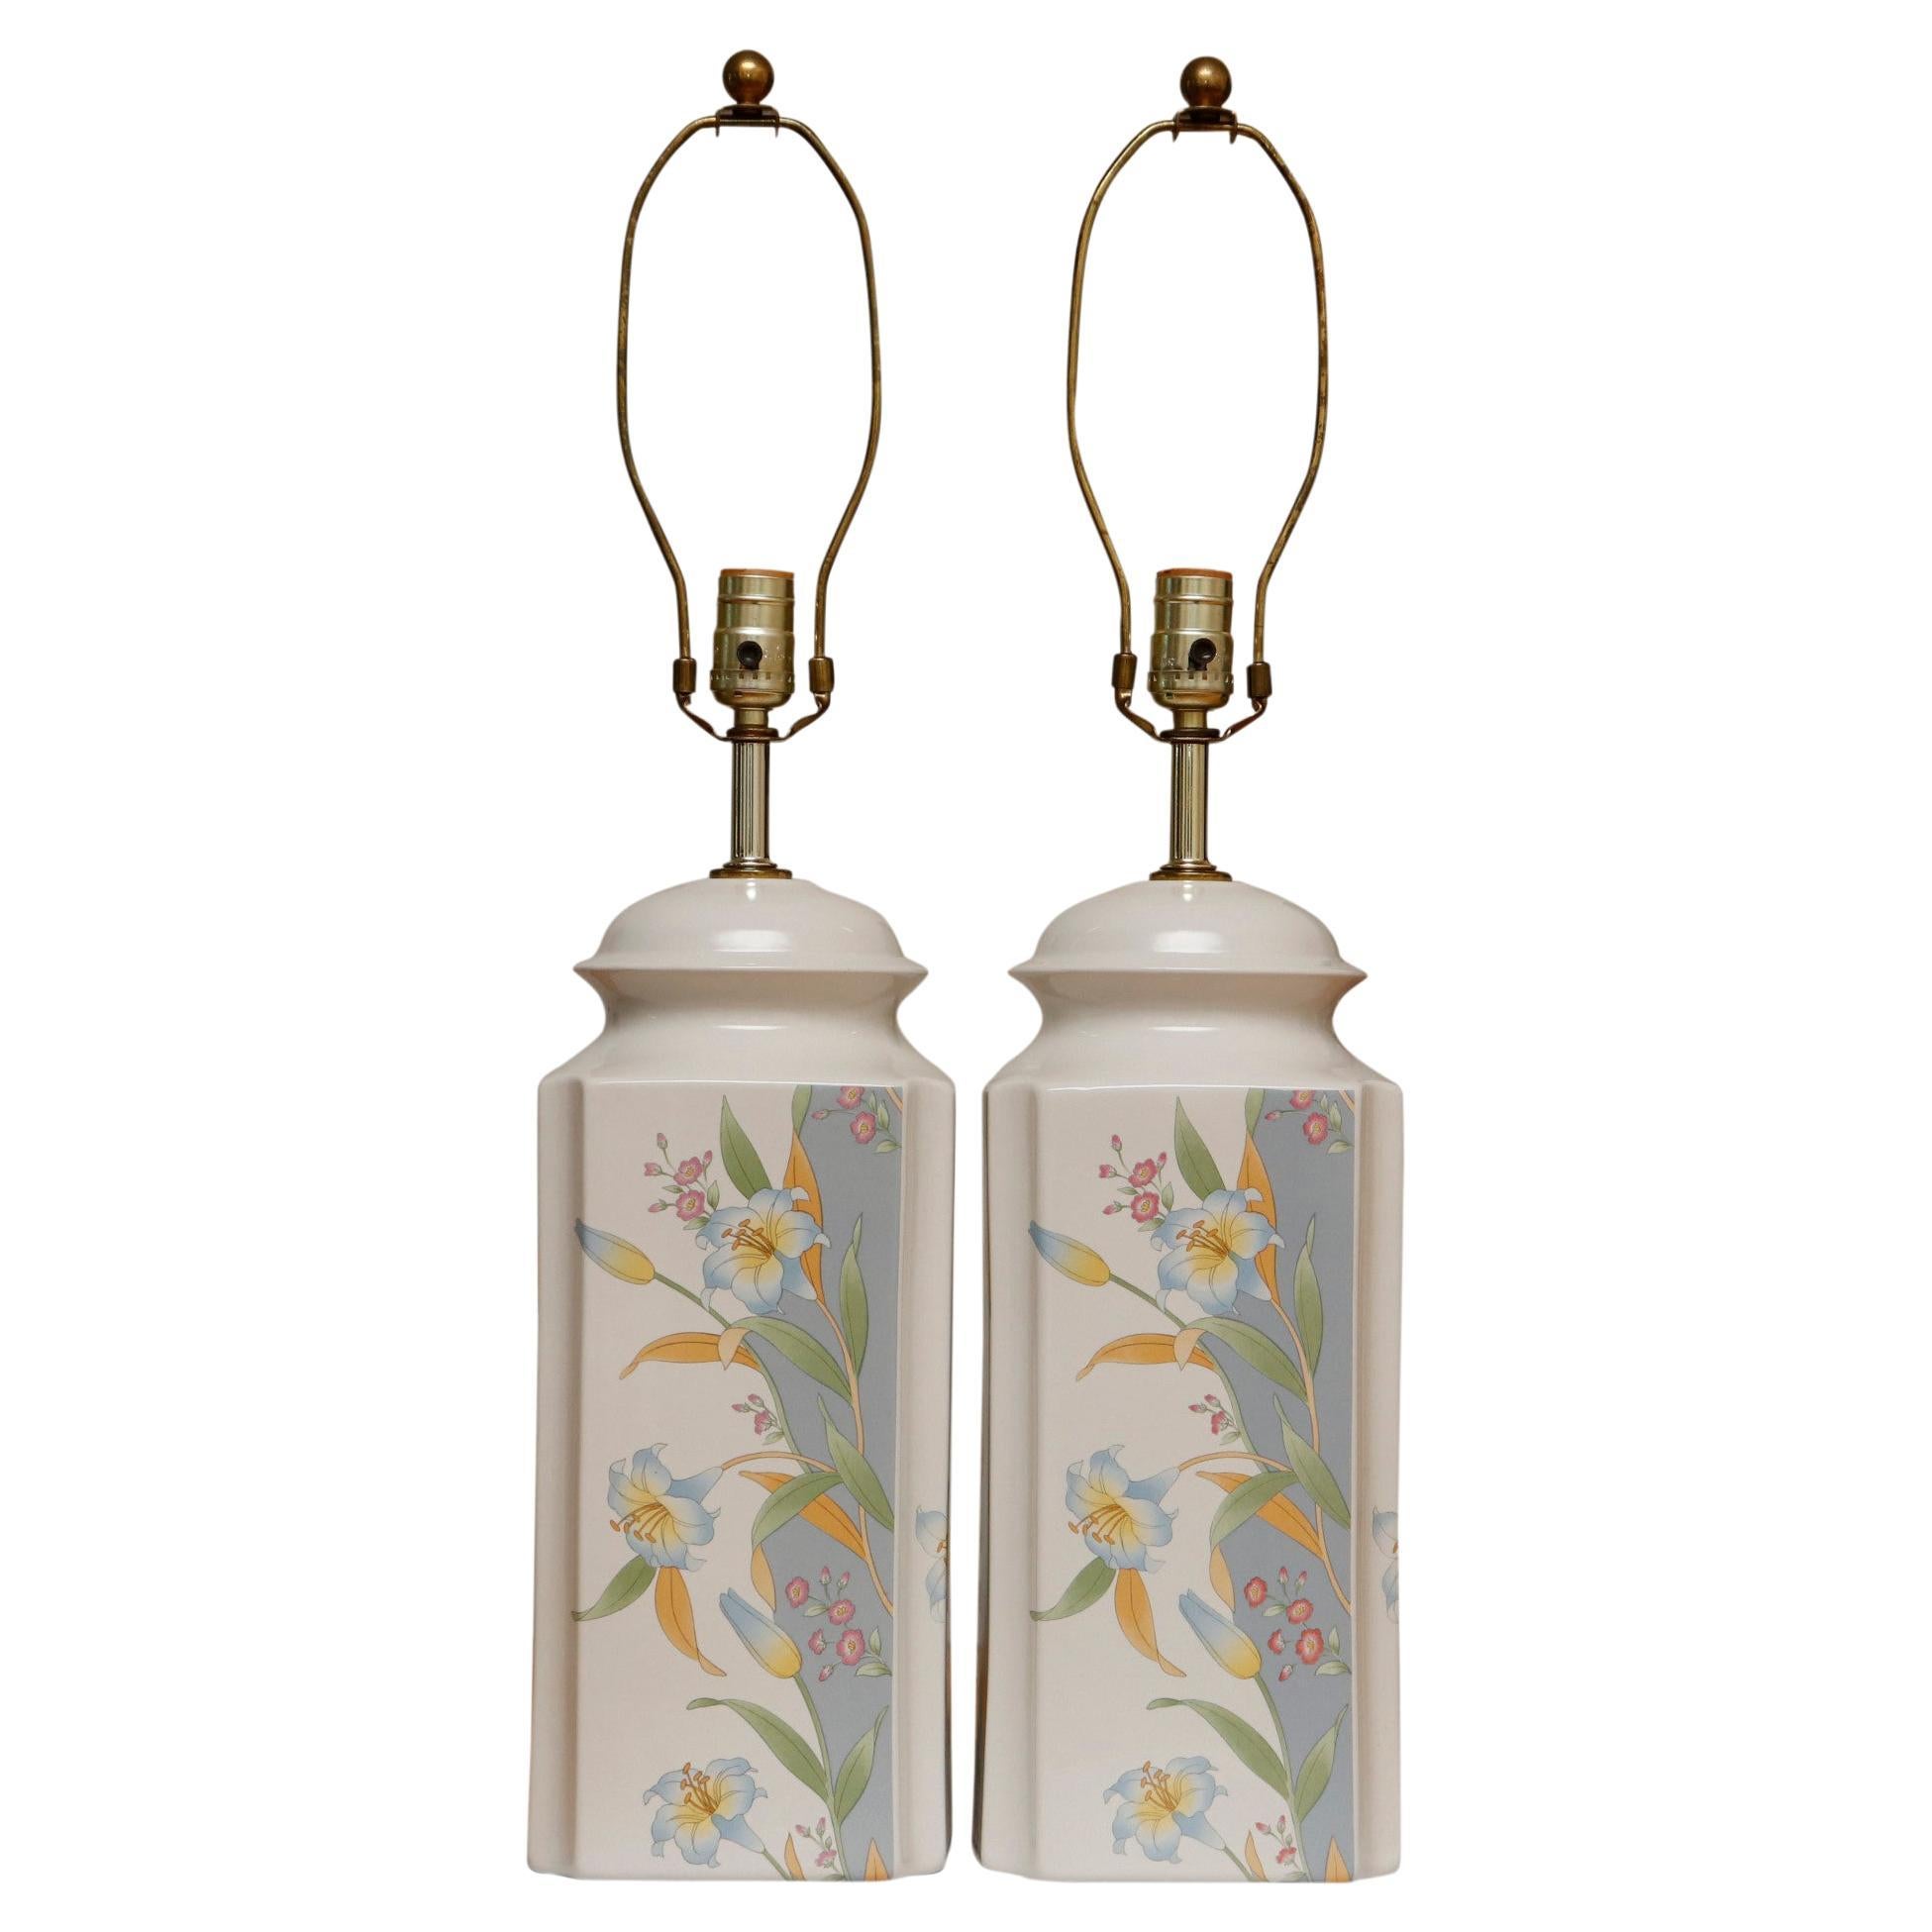 Murray Feiss Ceramic Table Lamps, a Pair